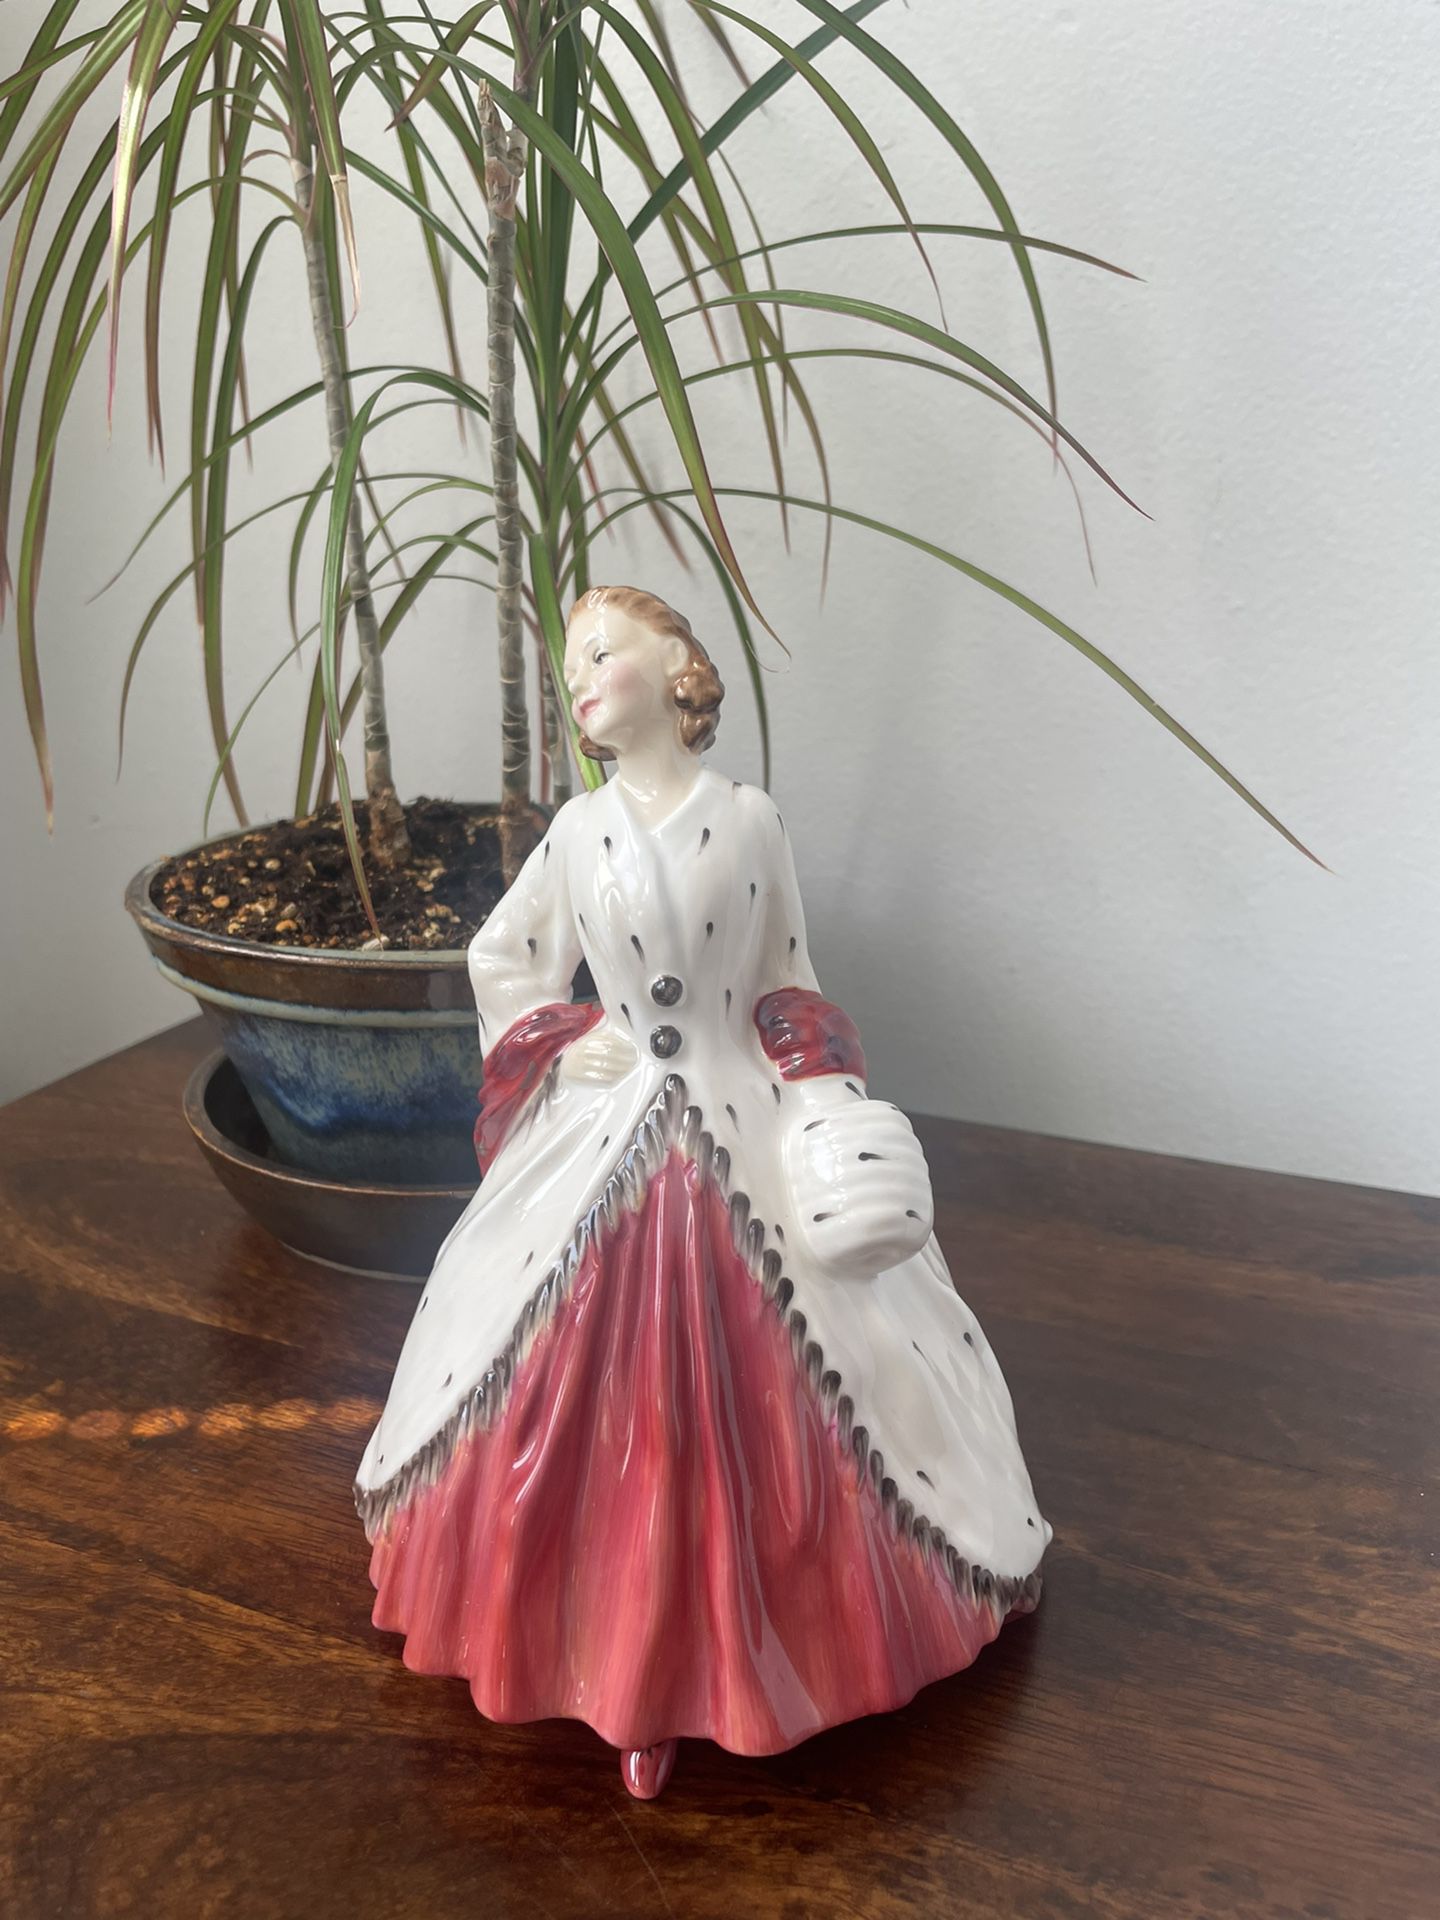 Royal Doulton Collectible Figurine “The Ermine Coat”